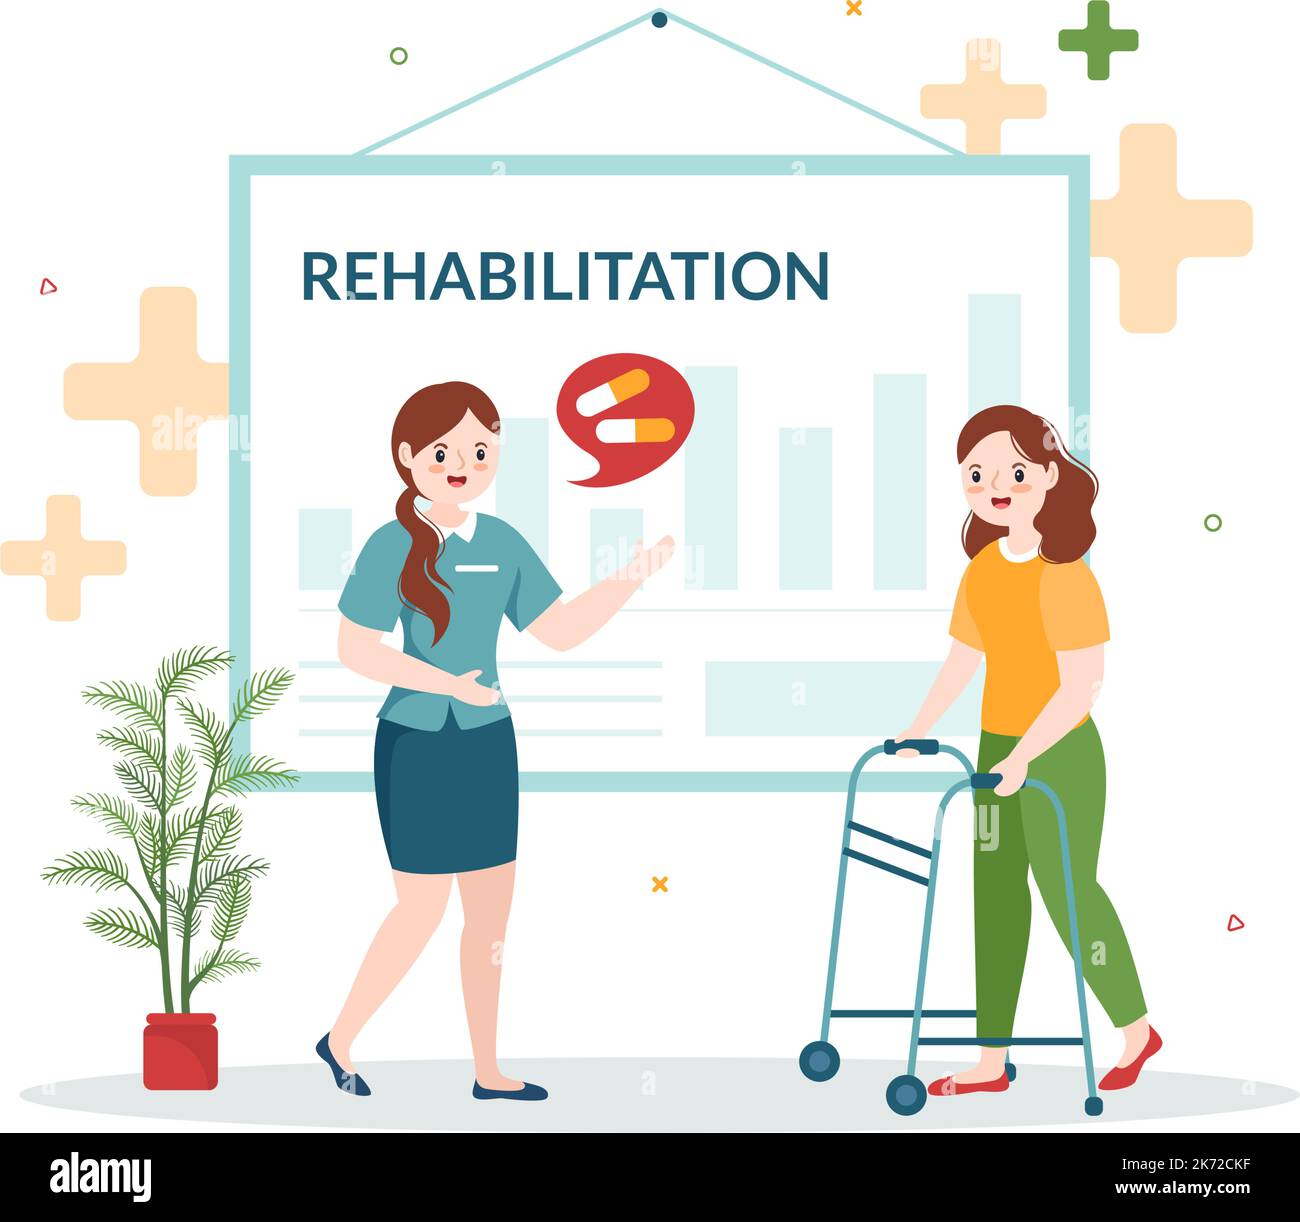 Rehabilitation Flat Cartoon Hand Drawn Templates Illustration with Doctor Helping Patient Orthopedic Physiotherapy, Physical Activity and Healthcare Stock Vector